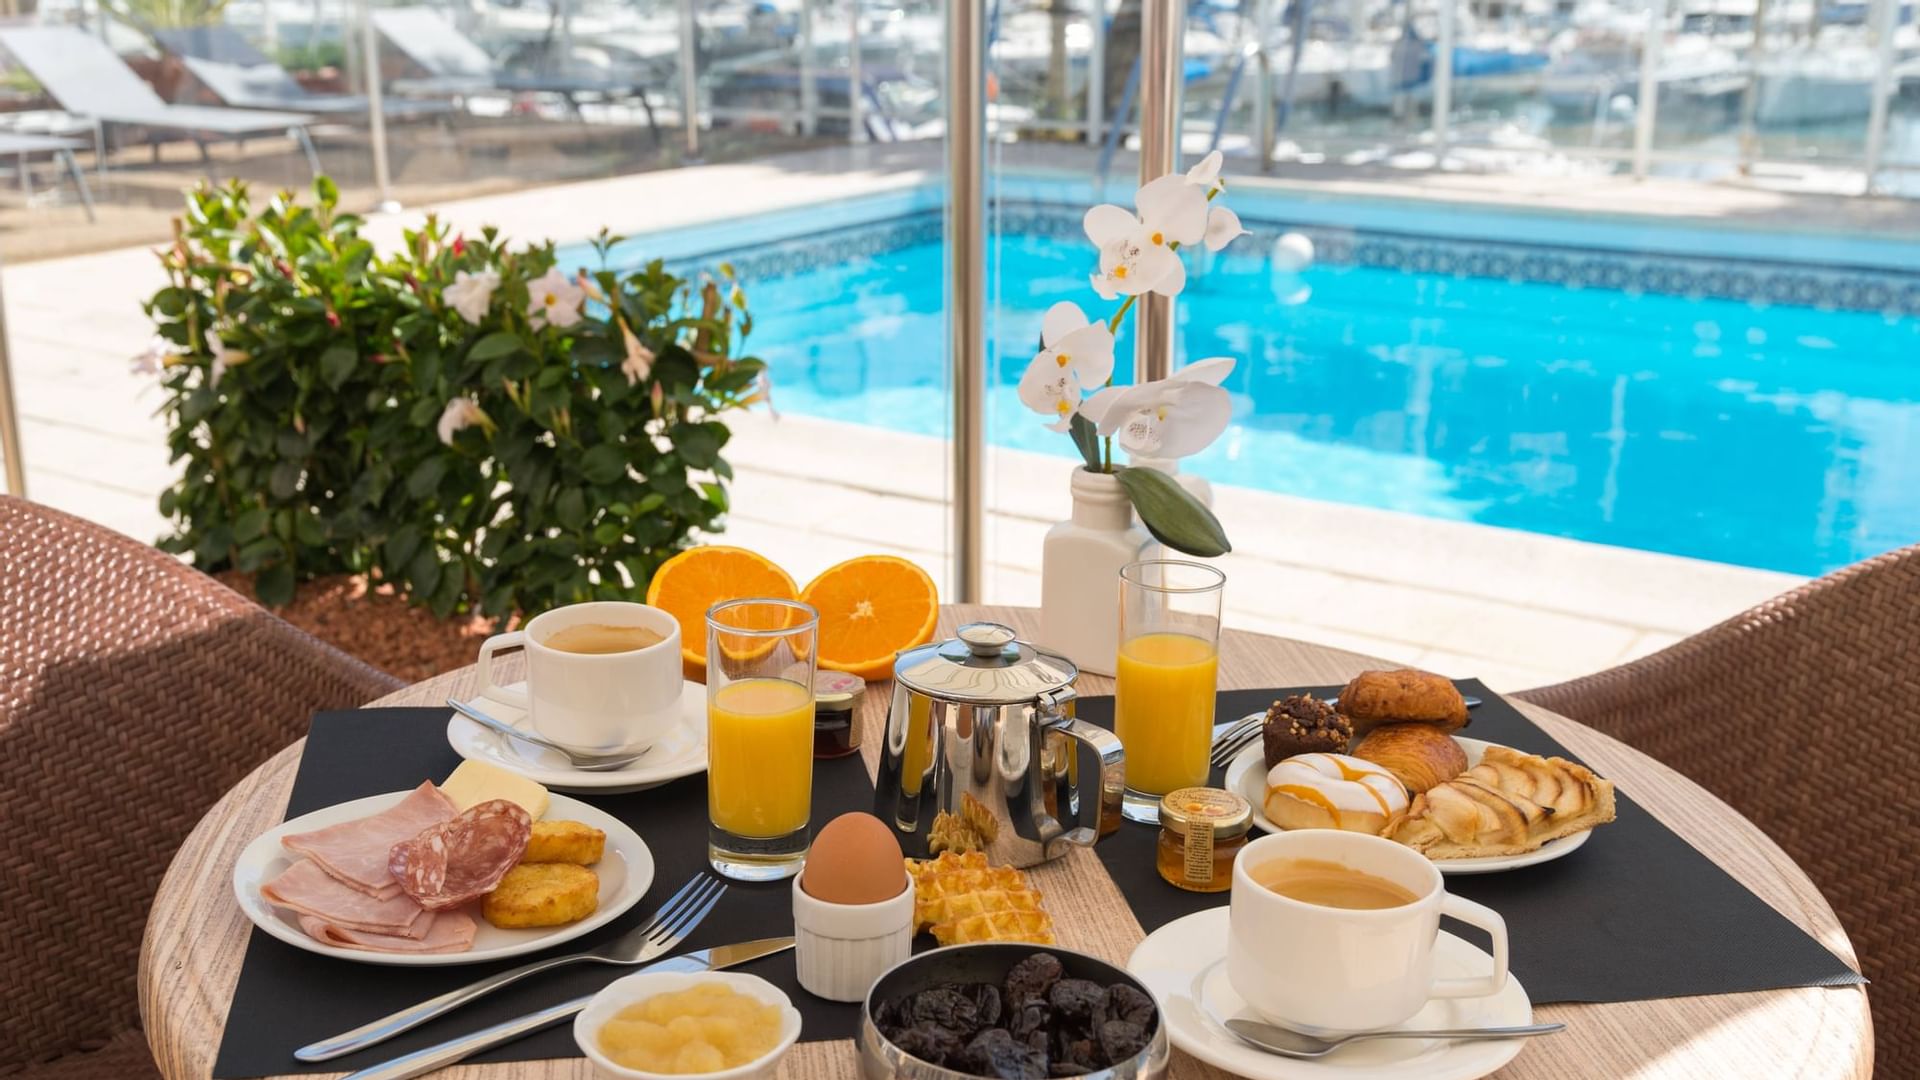 Breakfast on a table by an Outdoor Pool at Originals Hotels